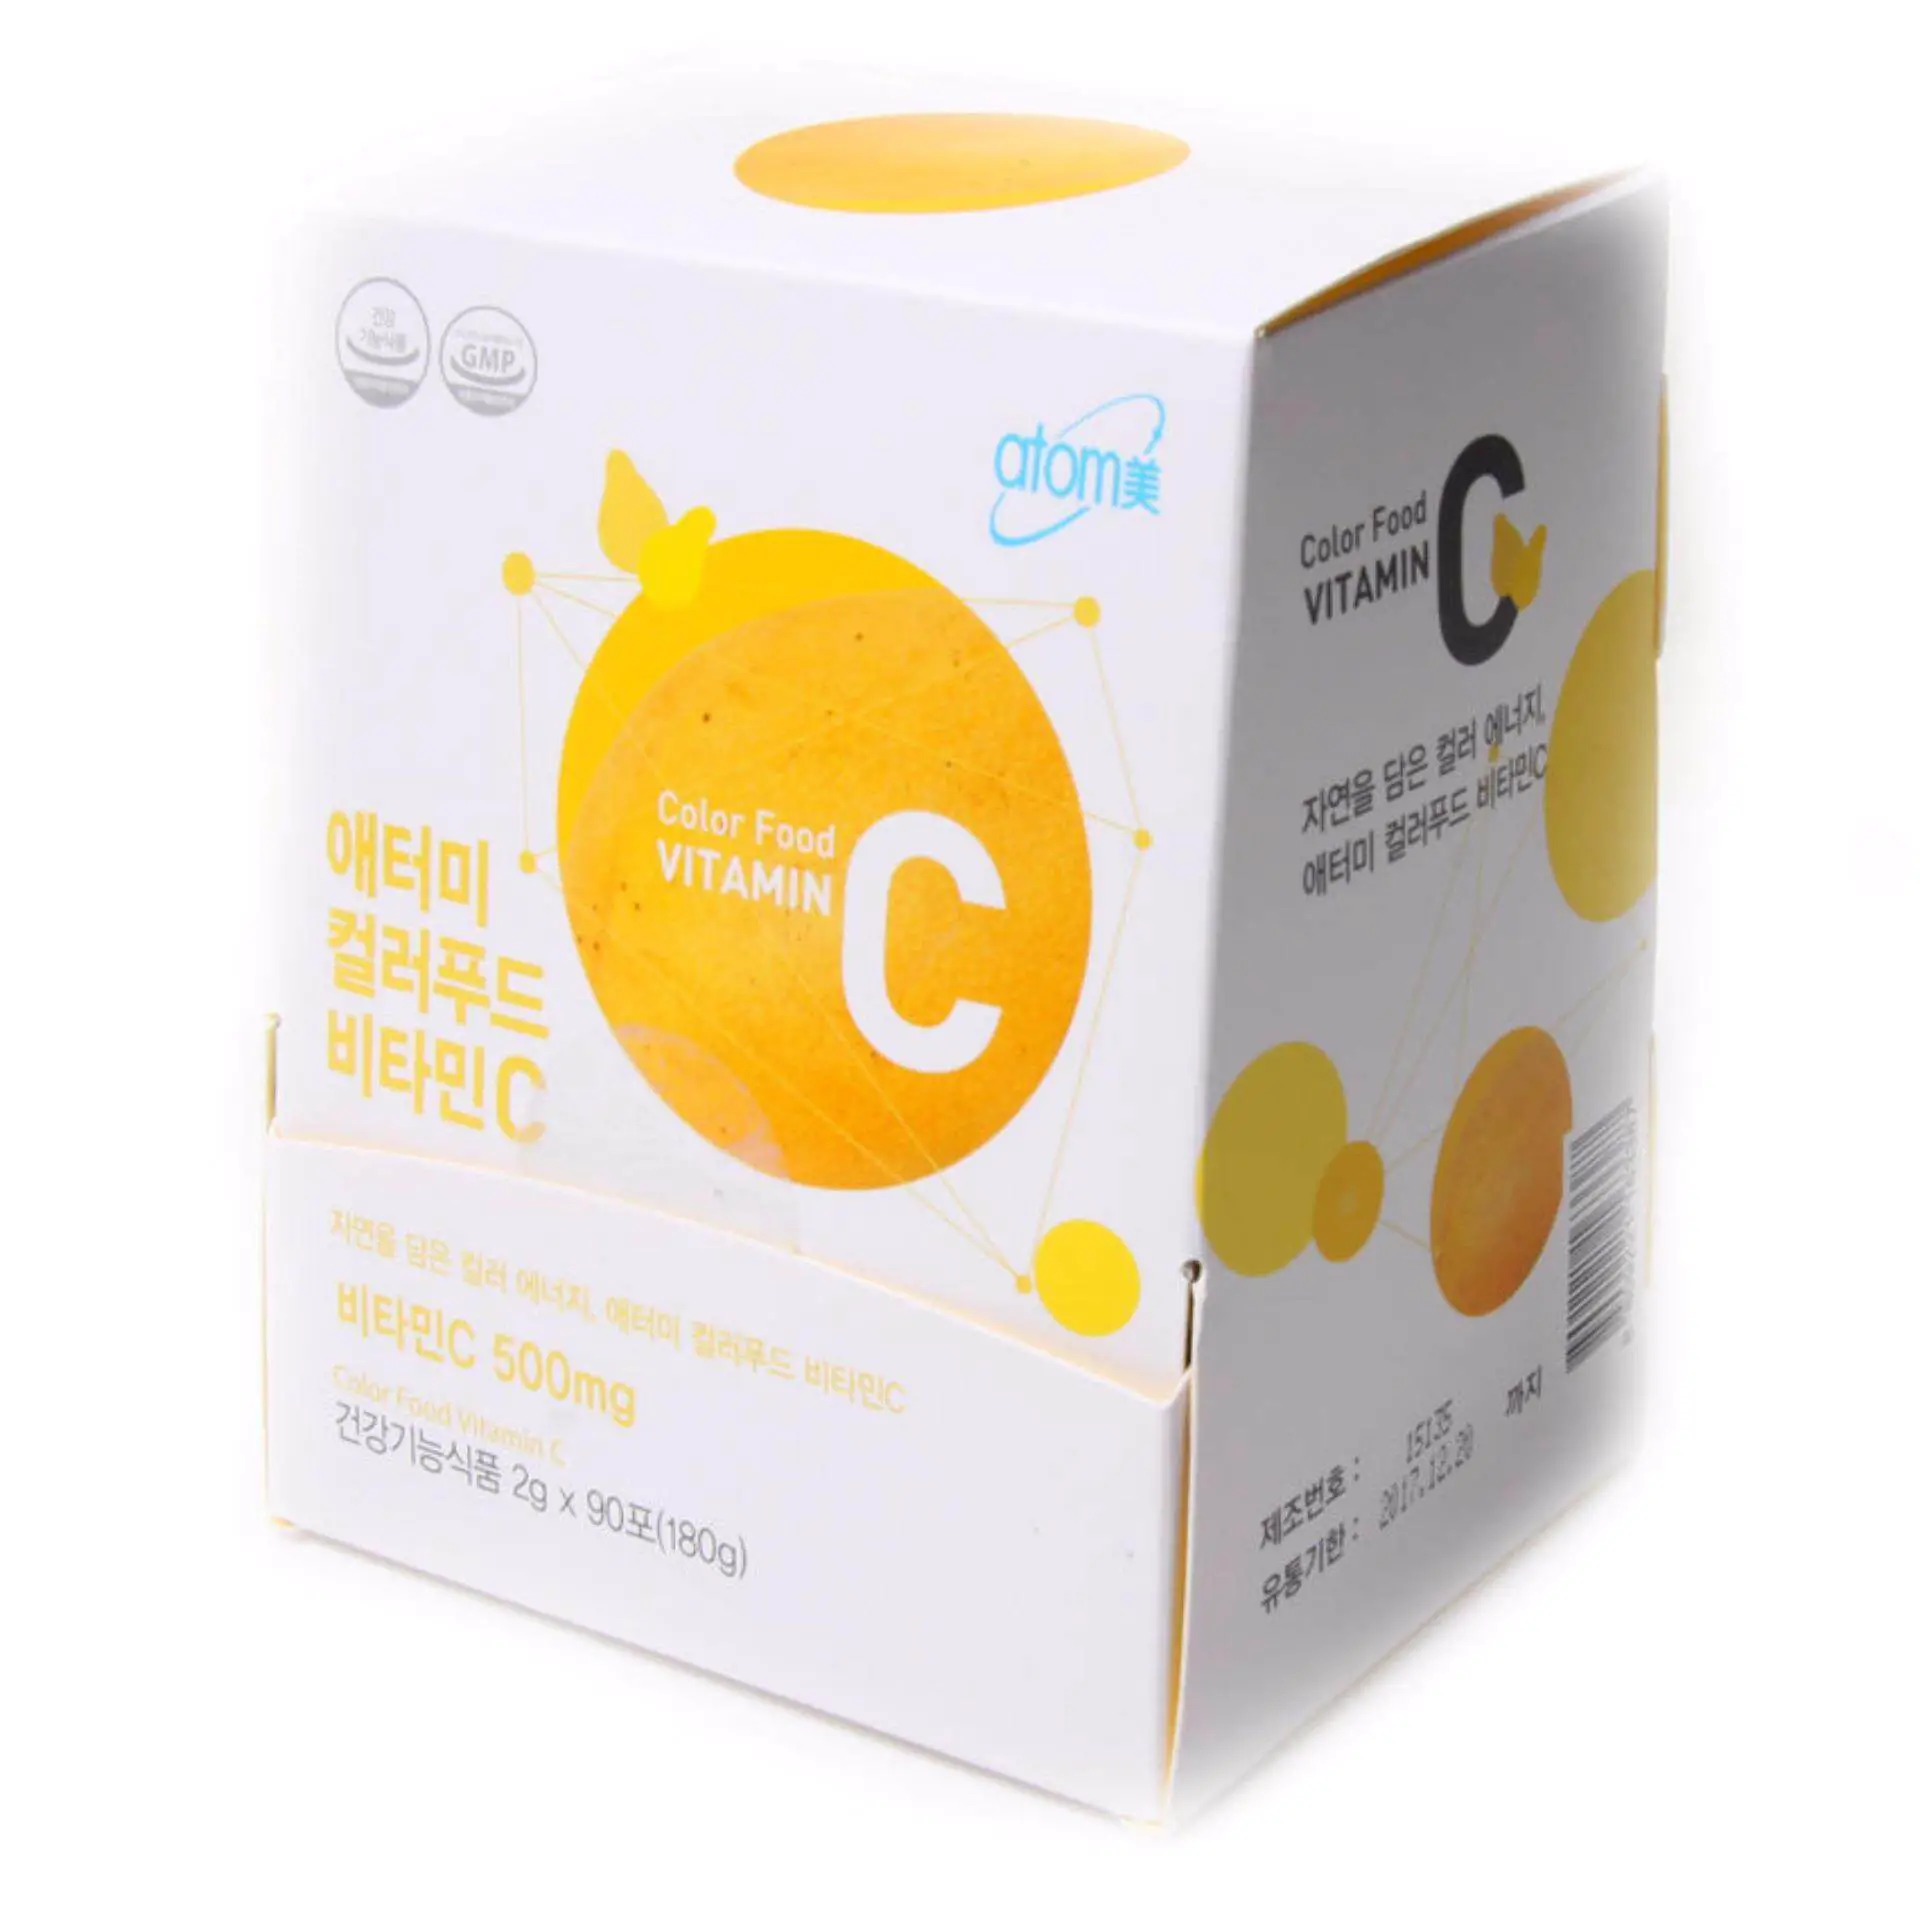 ATOMY Color Food Vitamin C 500mg 2g/package  2 Boxes of 180 packages